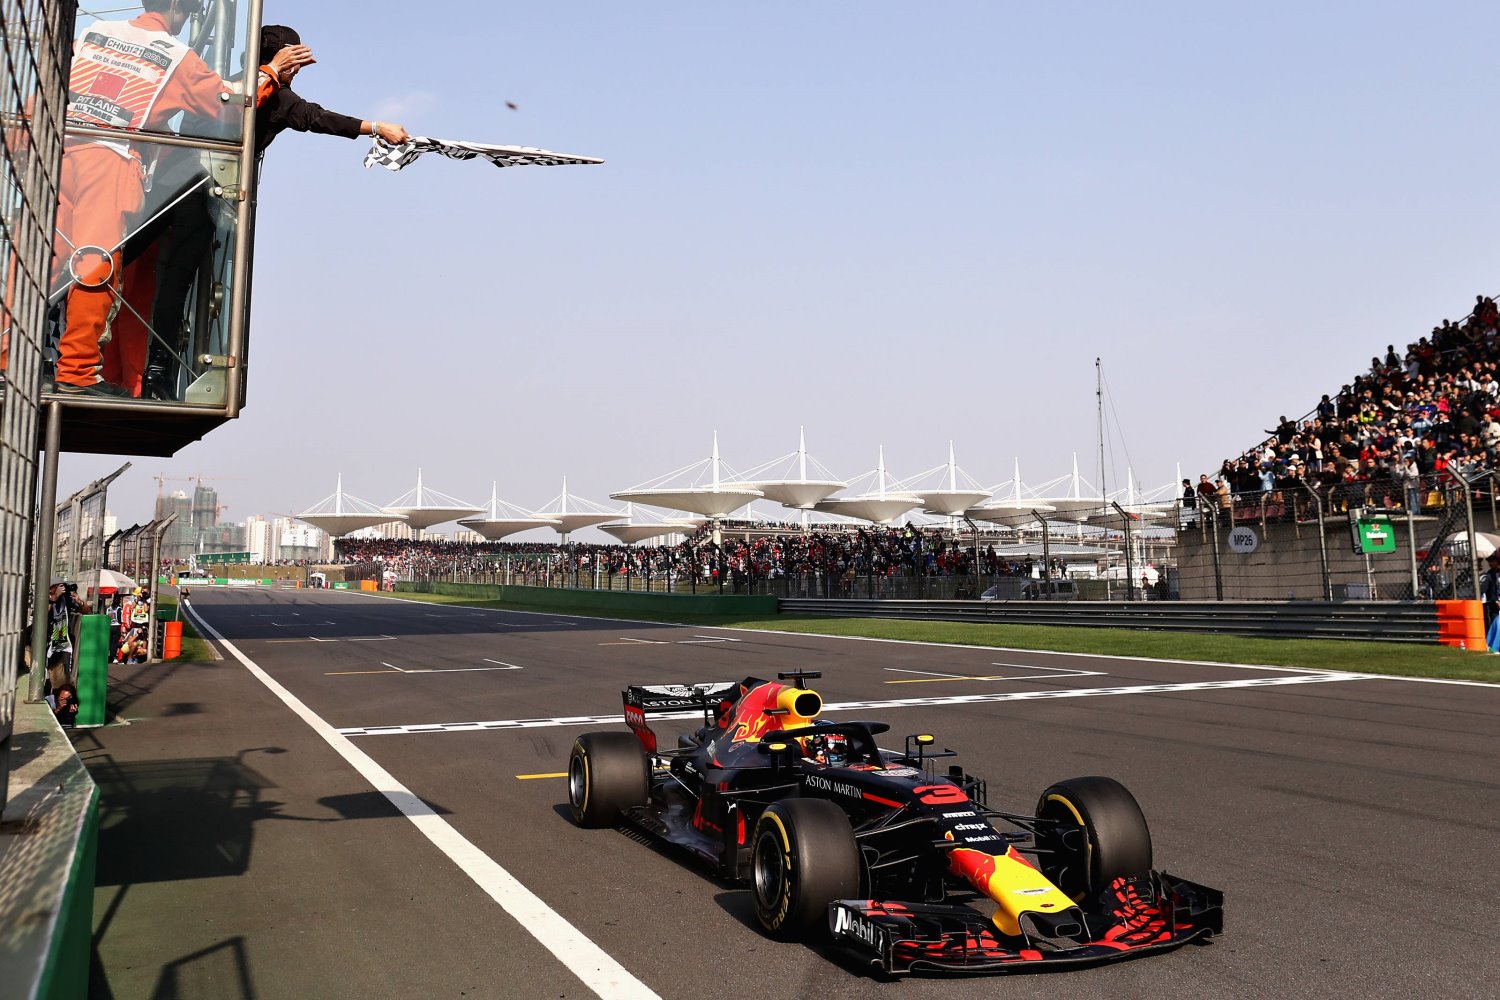 Red Bull wins in China but suffered engine issues on the weekend